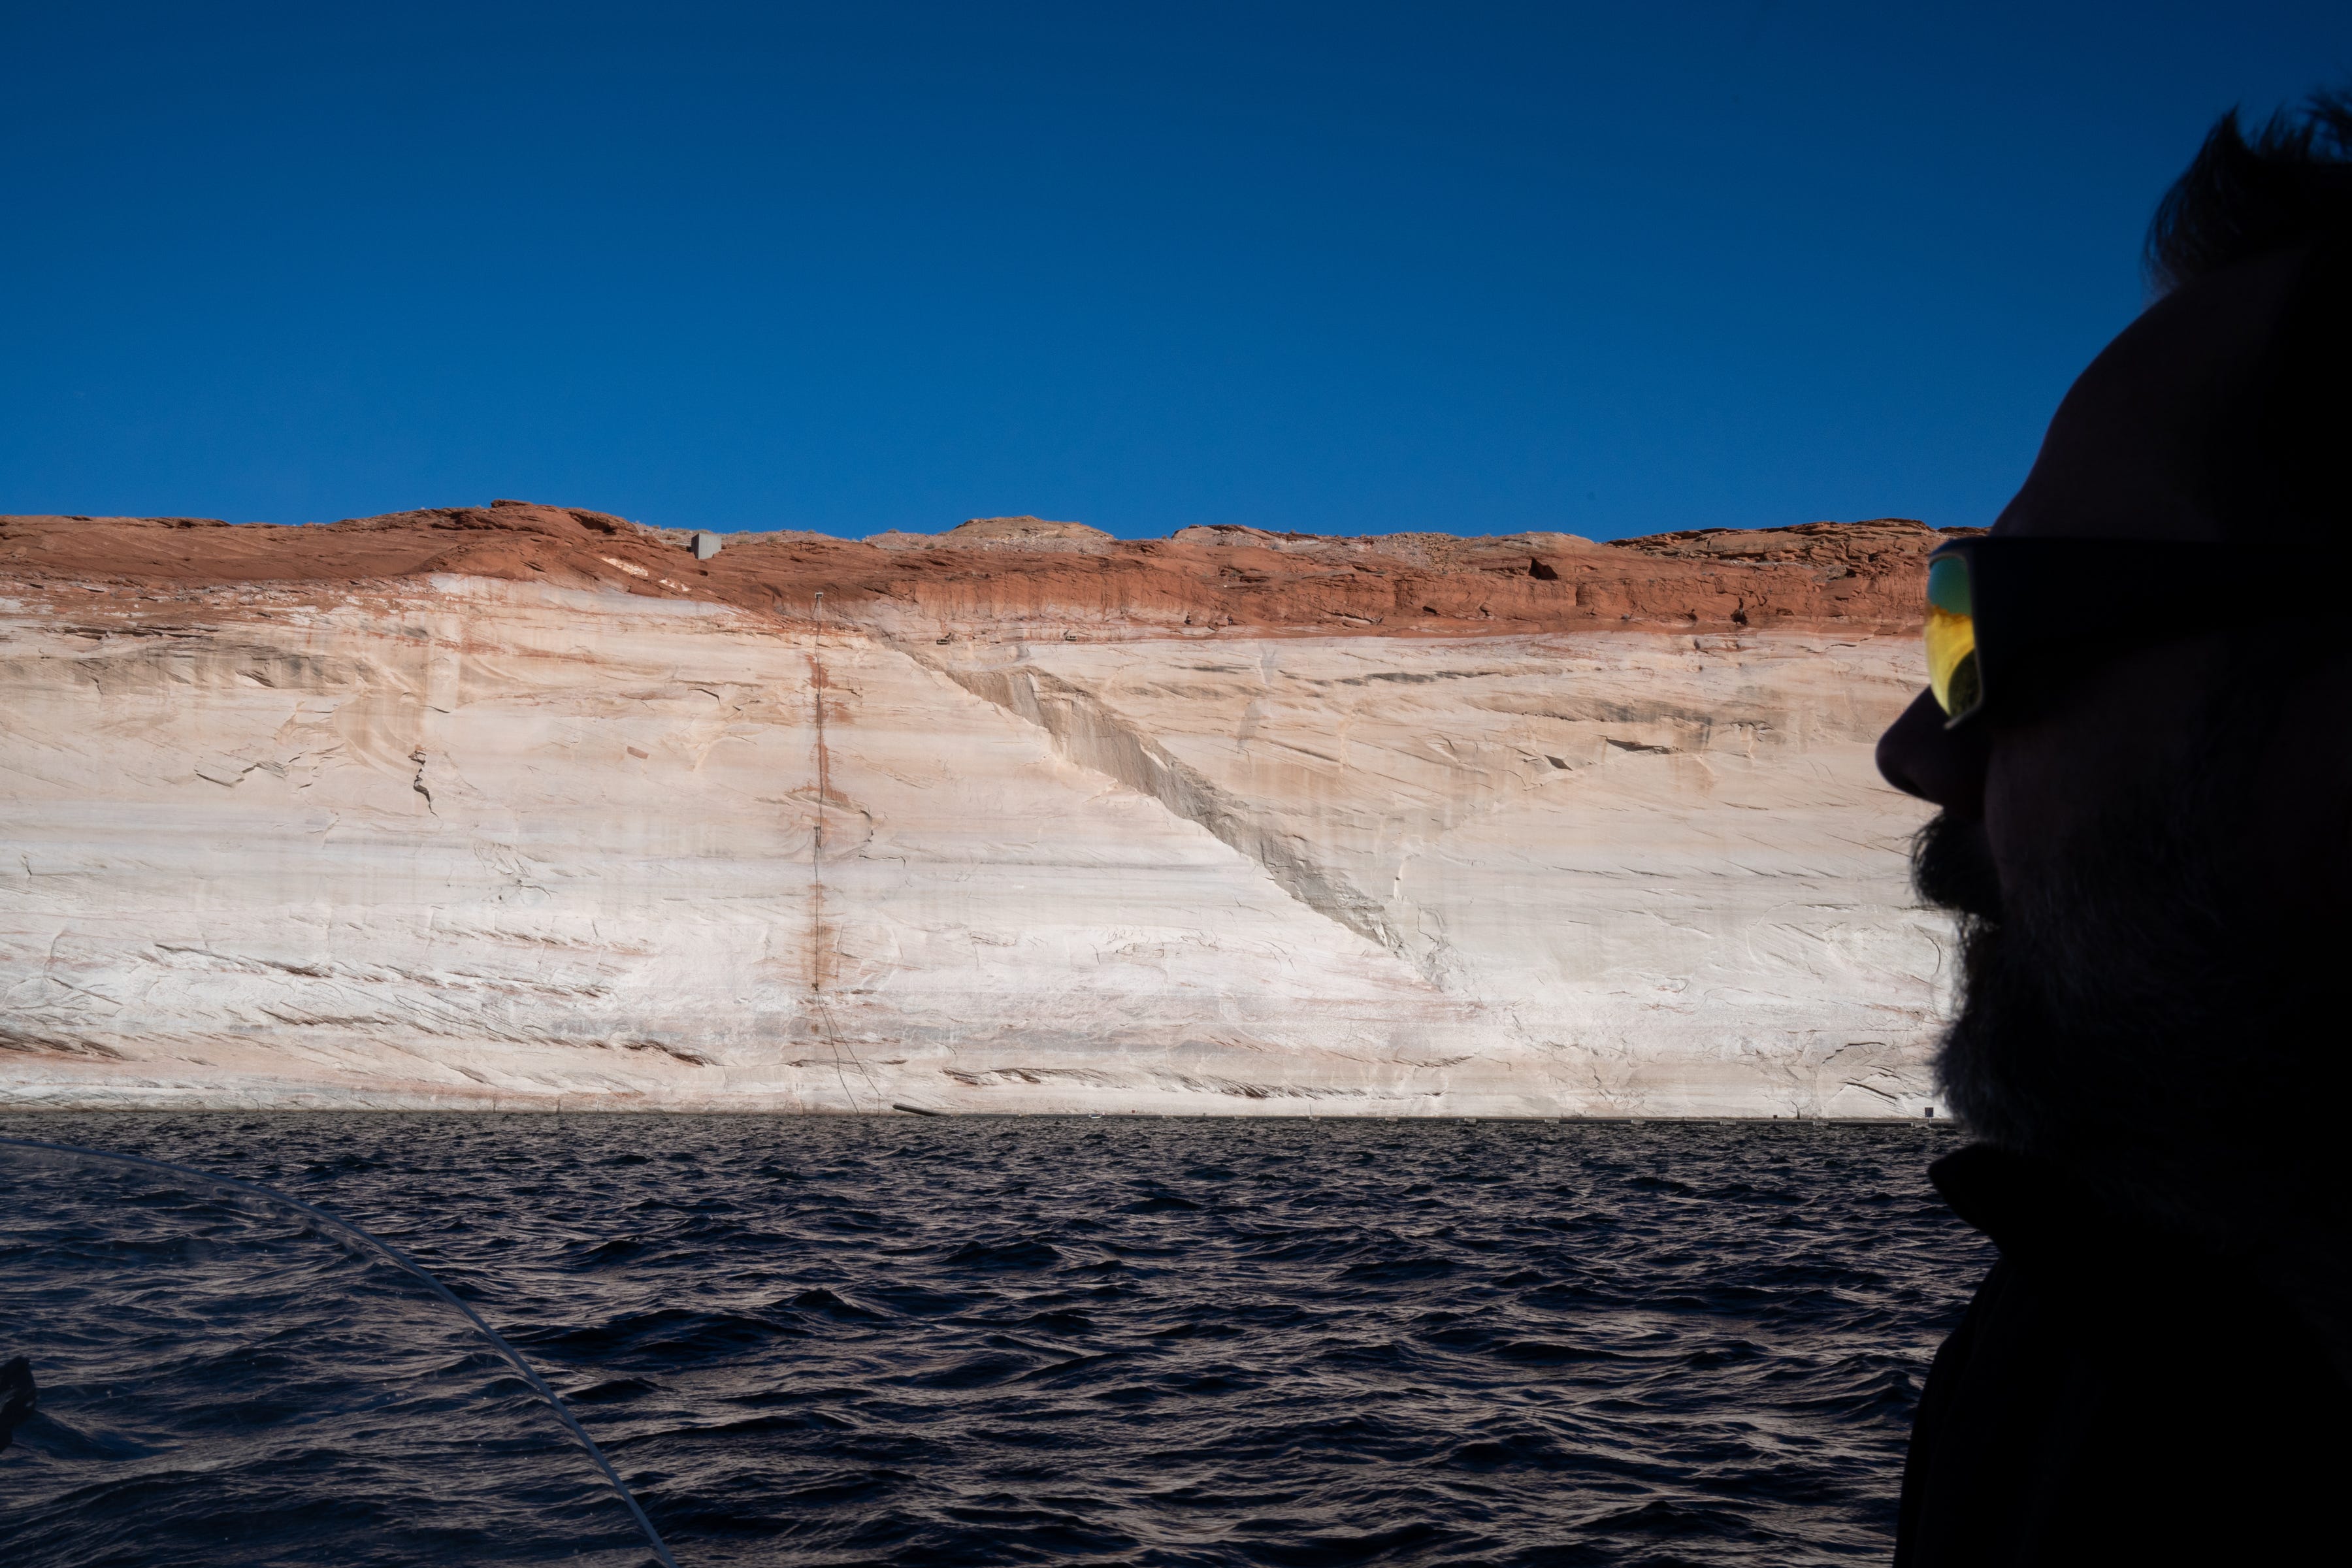 Guide Paul McNabb fishes for striped bass on Feb. 2, 2022, near Glen Canyon Dam near Page. A high-water mark or bathtub ring is visible on the shoreline; Lake Powell was down over 168 vertical feet, at the time.